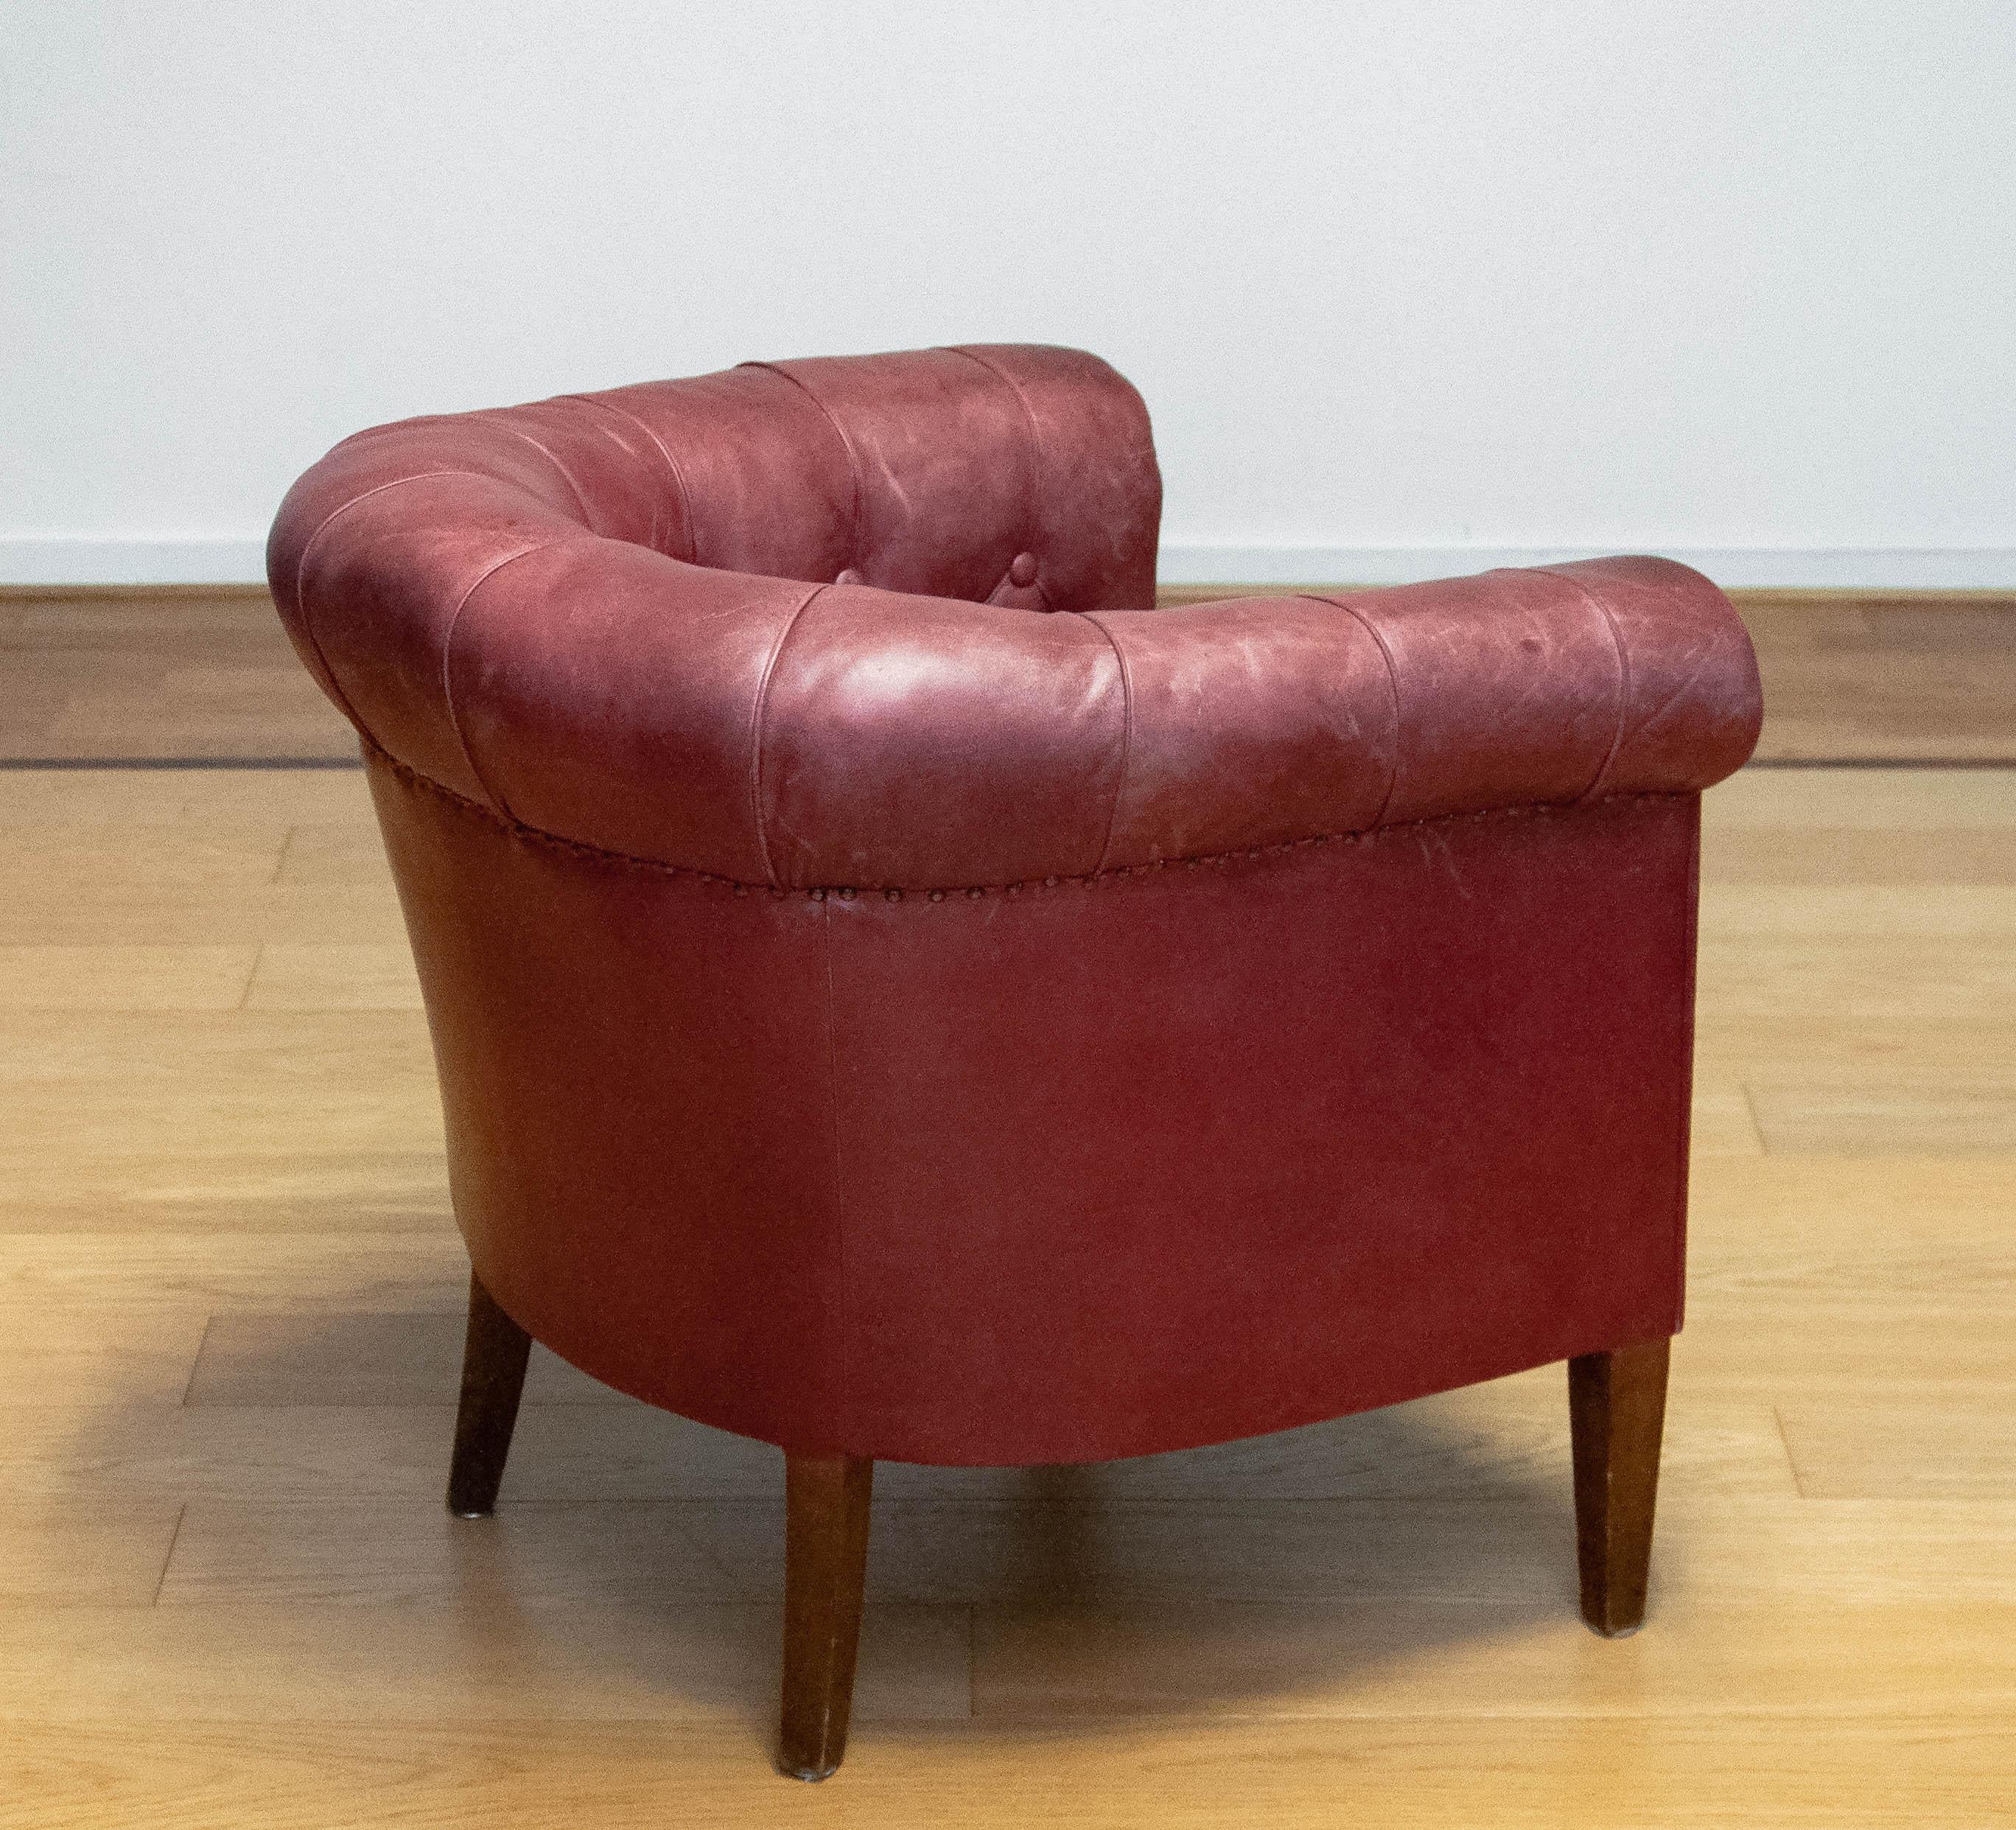 1930s Swedish Crimson Red Chesterfield Club / Lounge Chair in Patinated Leather For Sale 1